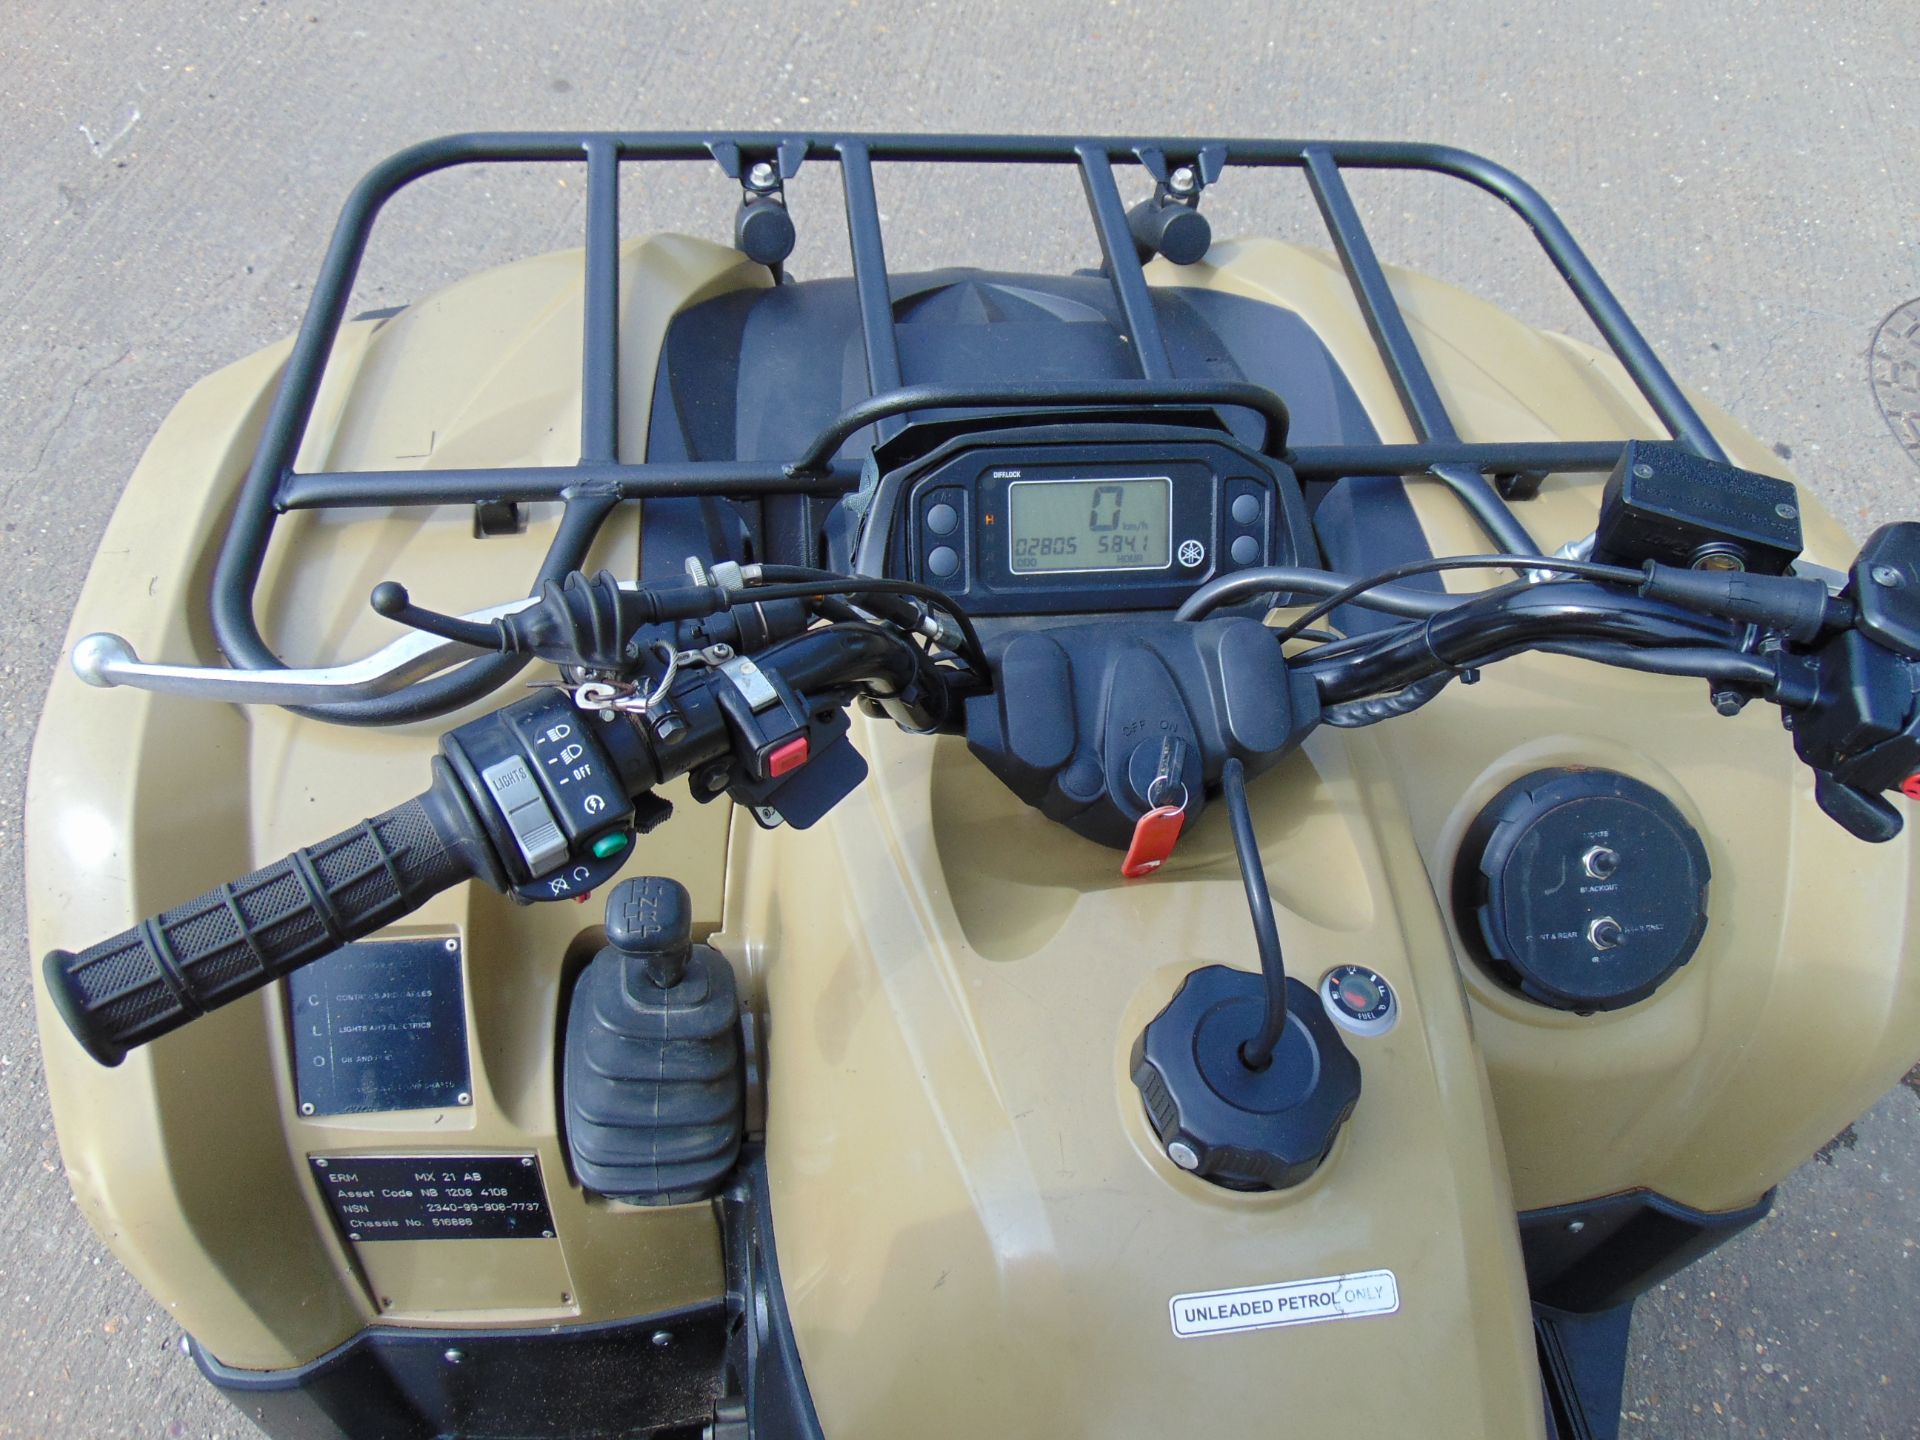 Yamaha Grizzly 450 4 x 4 ATV Quad Bike 584 hours only from MOD - Image 18 of 30